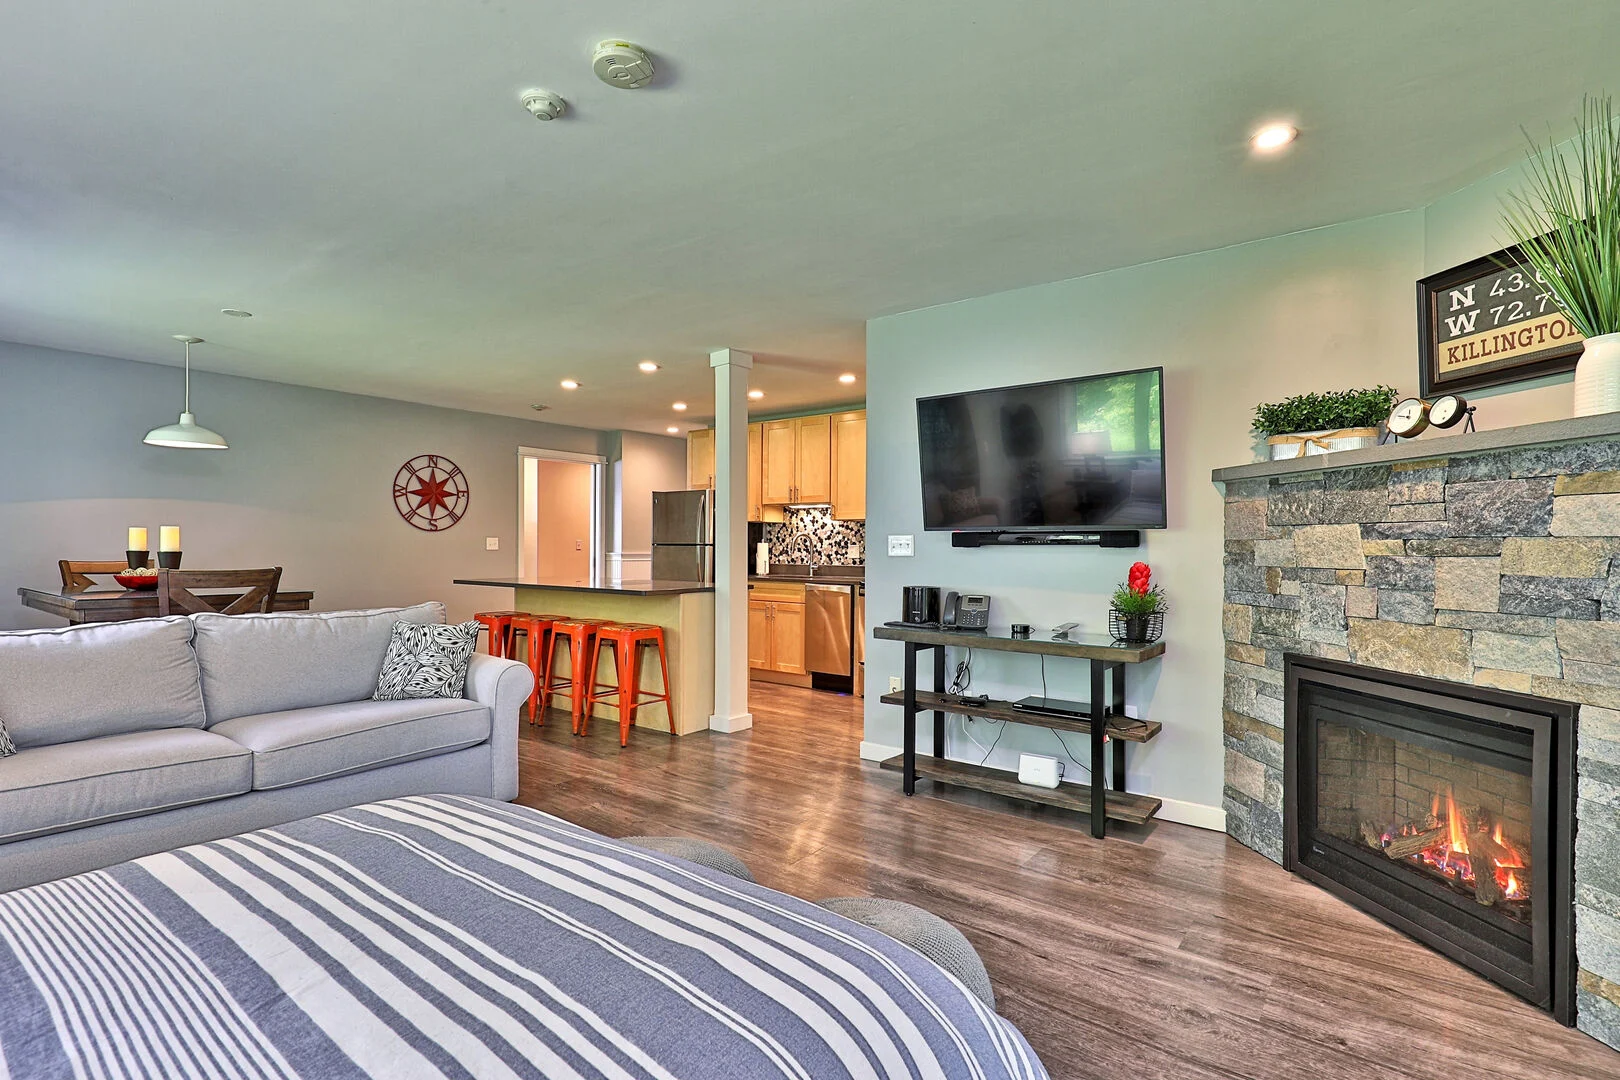 View of a condo room featuring a fireplace, TV and queen bed.